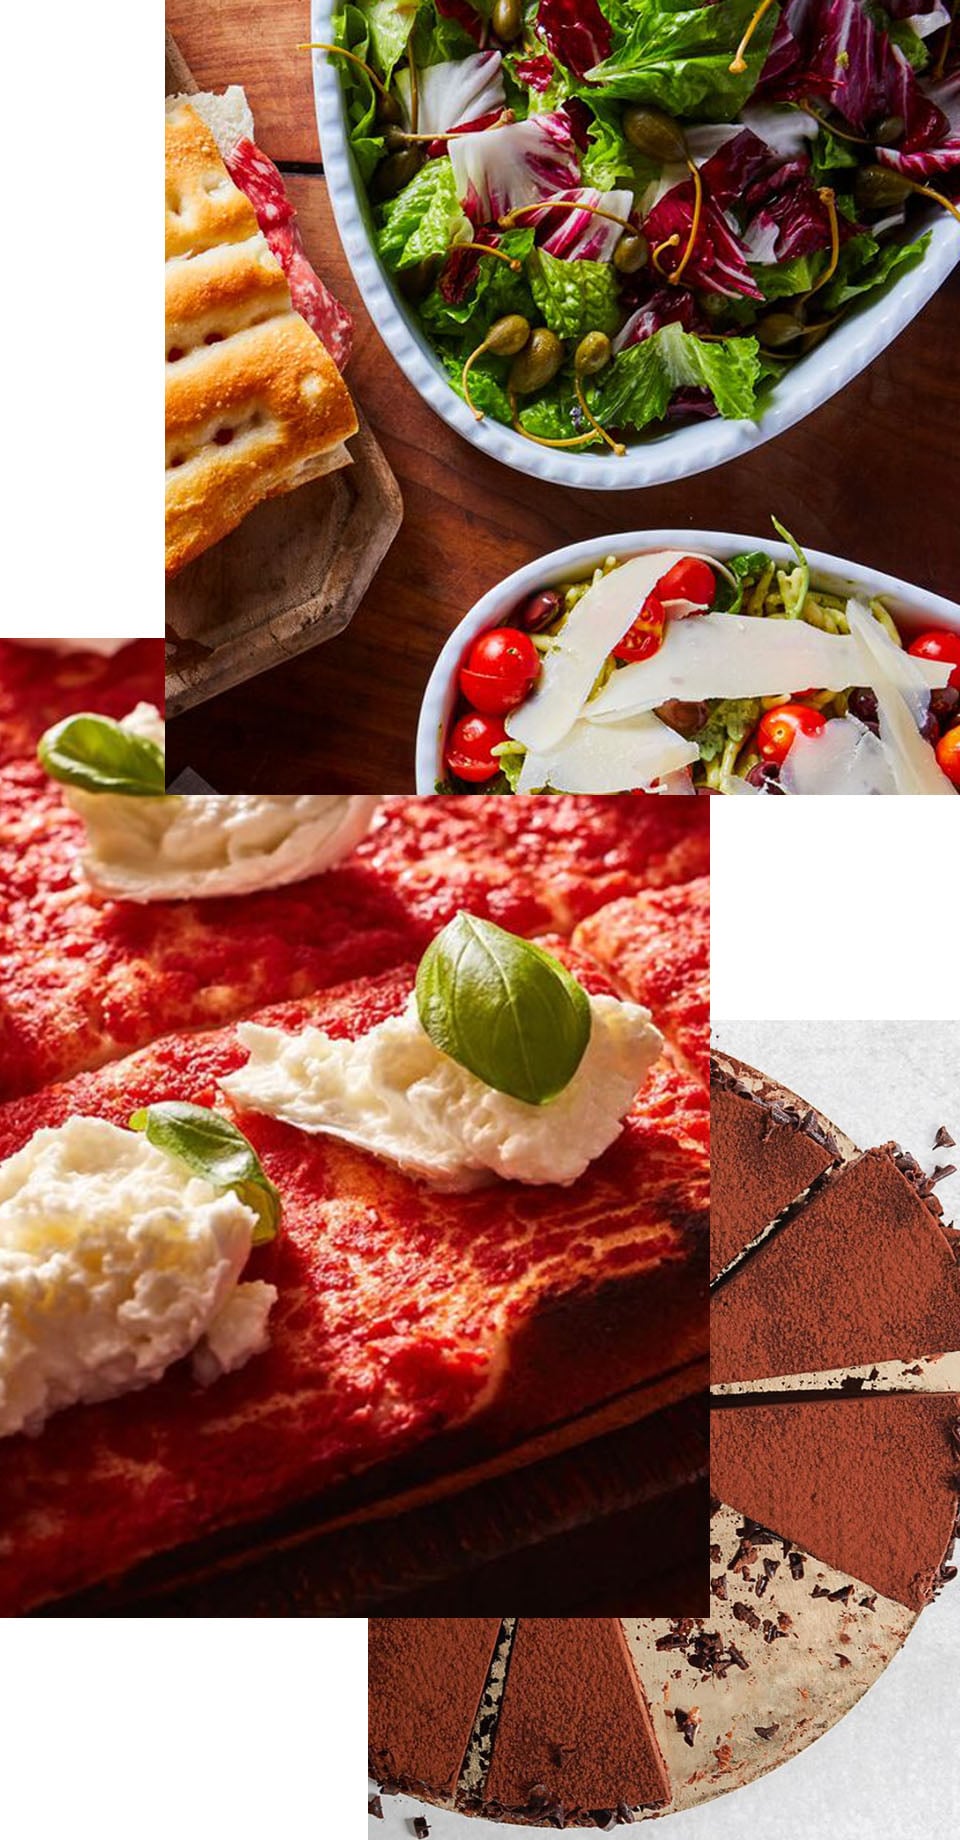 Image collage of a sandwich, salads, pizza, and dessert